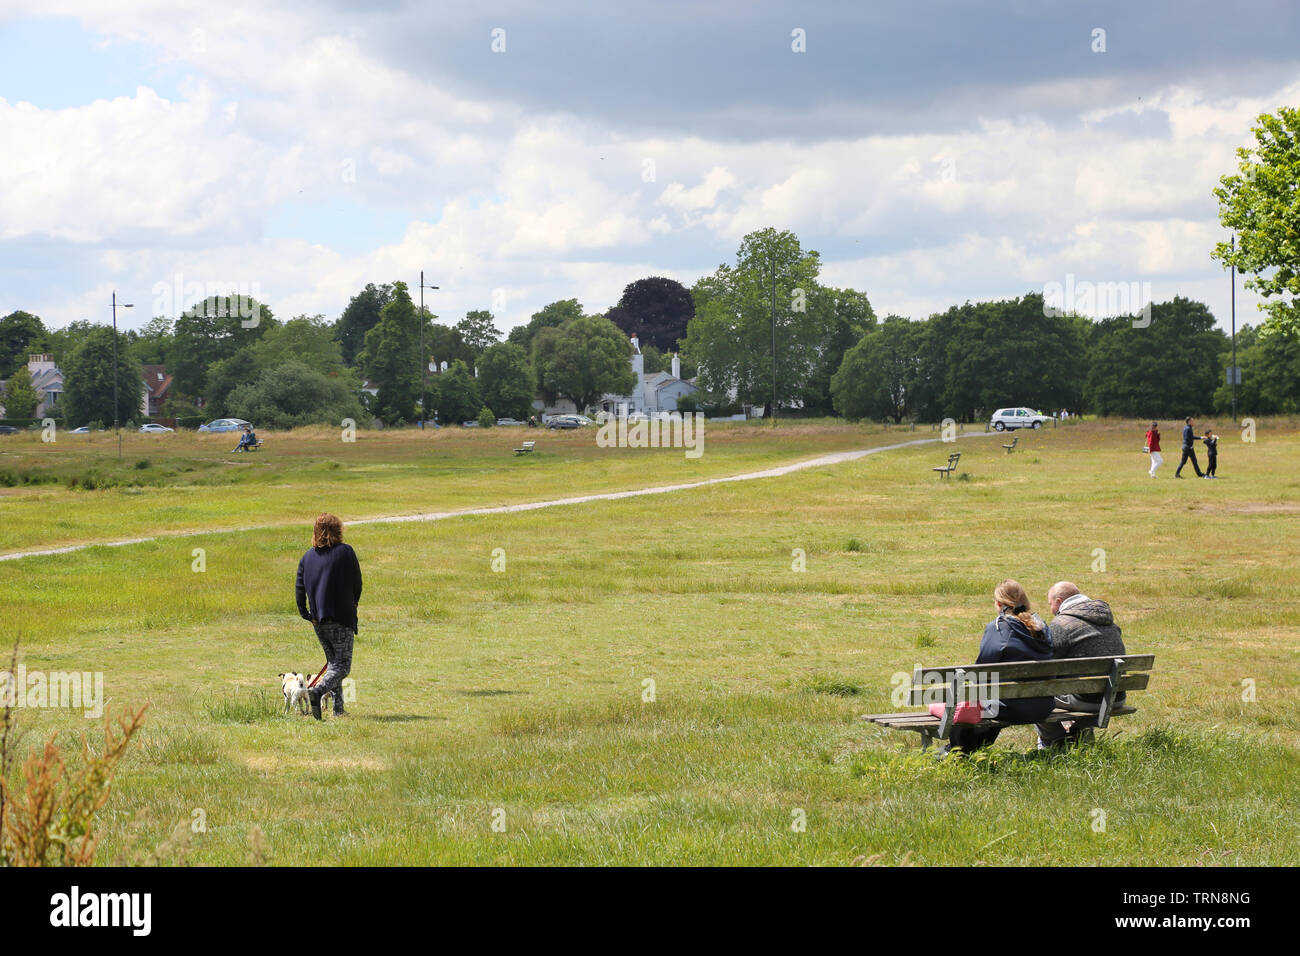 Wimbledon Common, southwest London, UK, summer. People walking and sitting on the open grassy area around Rushmere Pond close to Wimbledon Village. Stock Photo